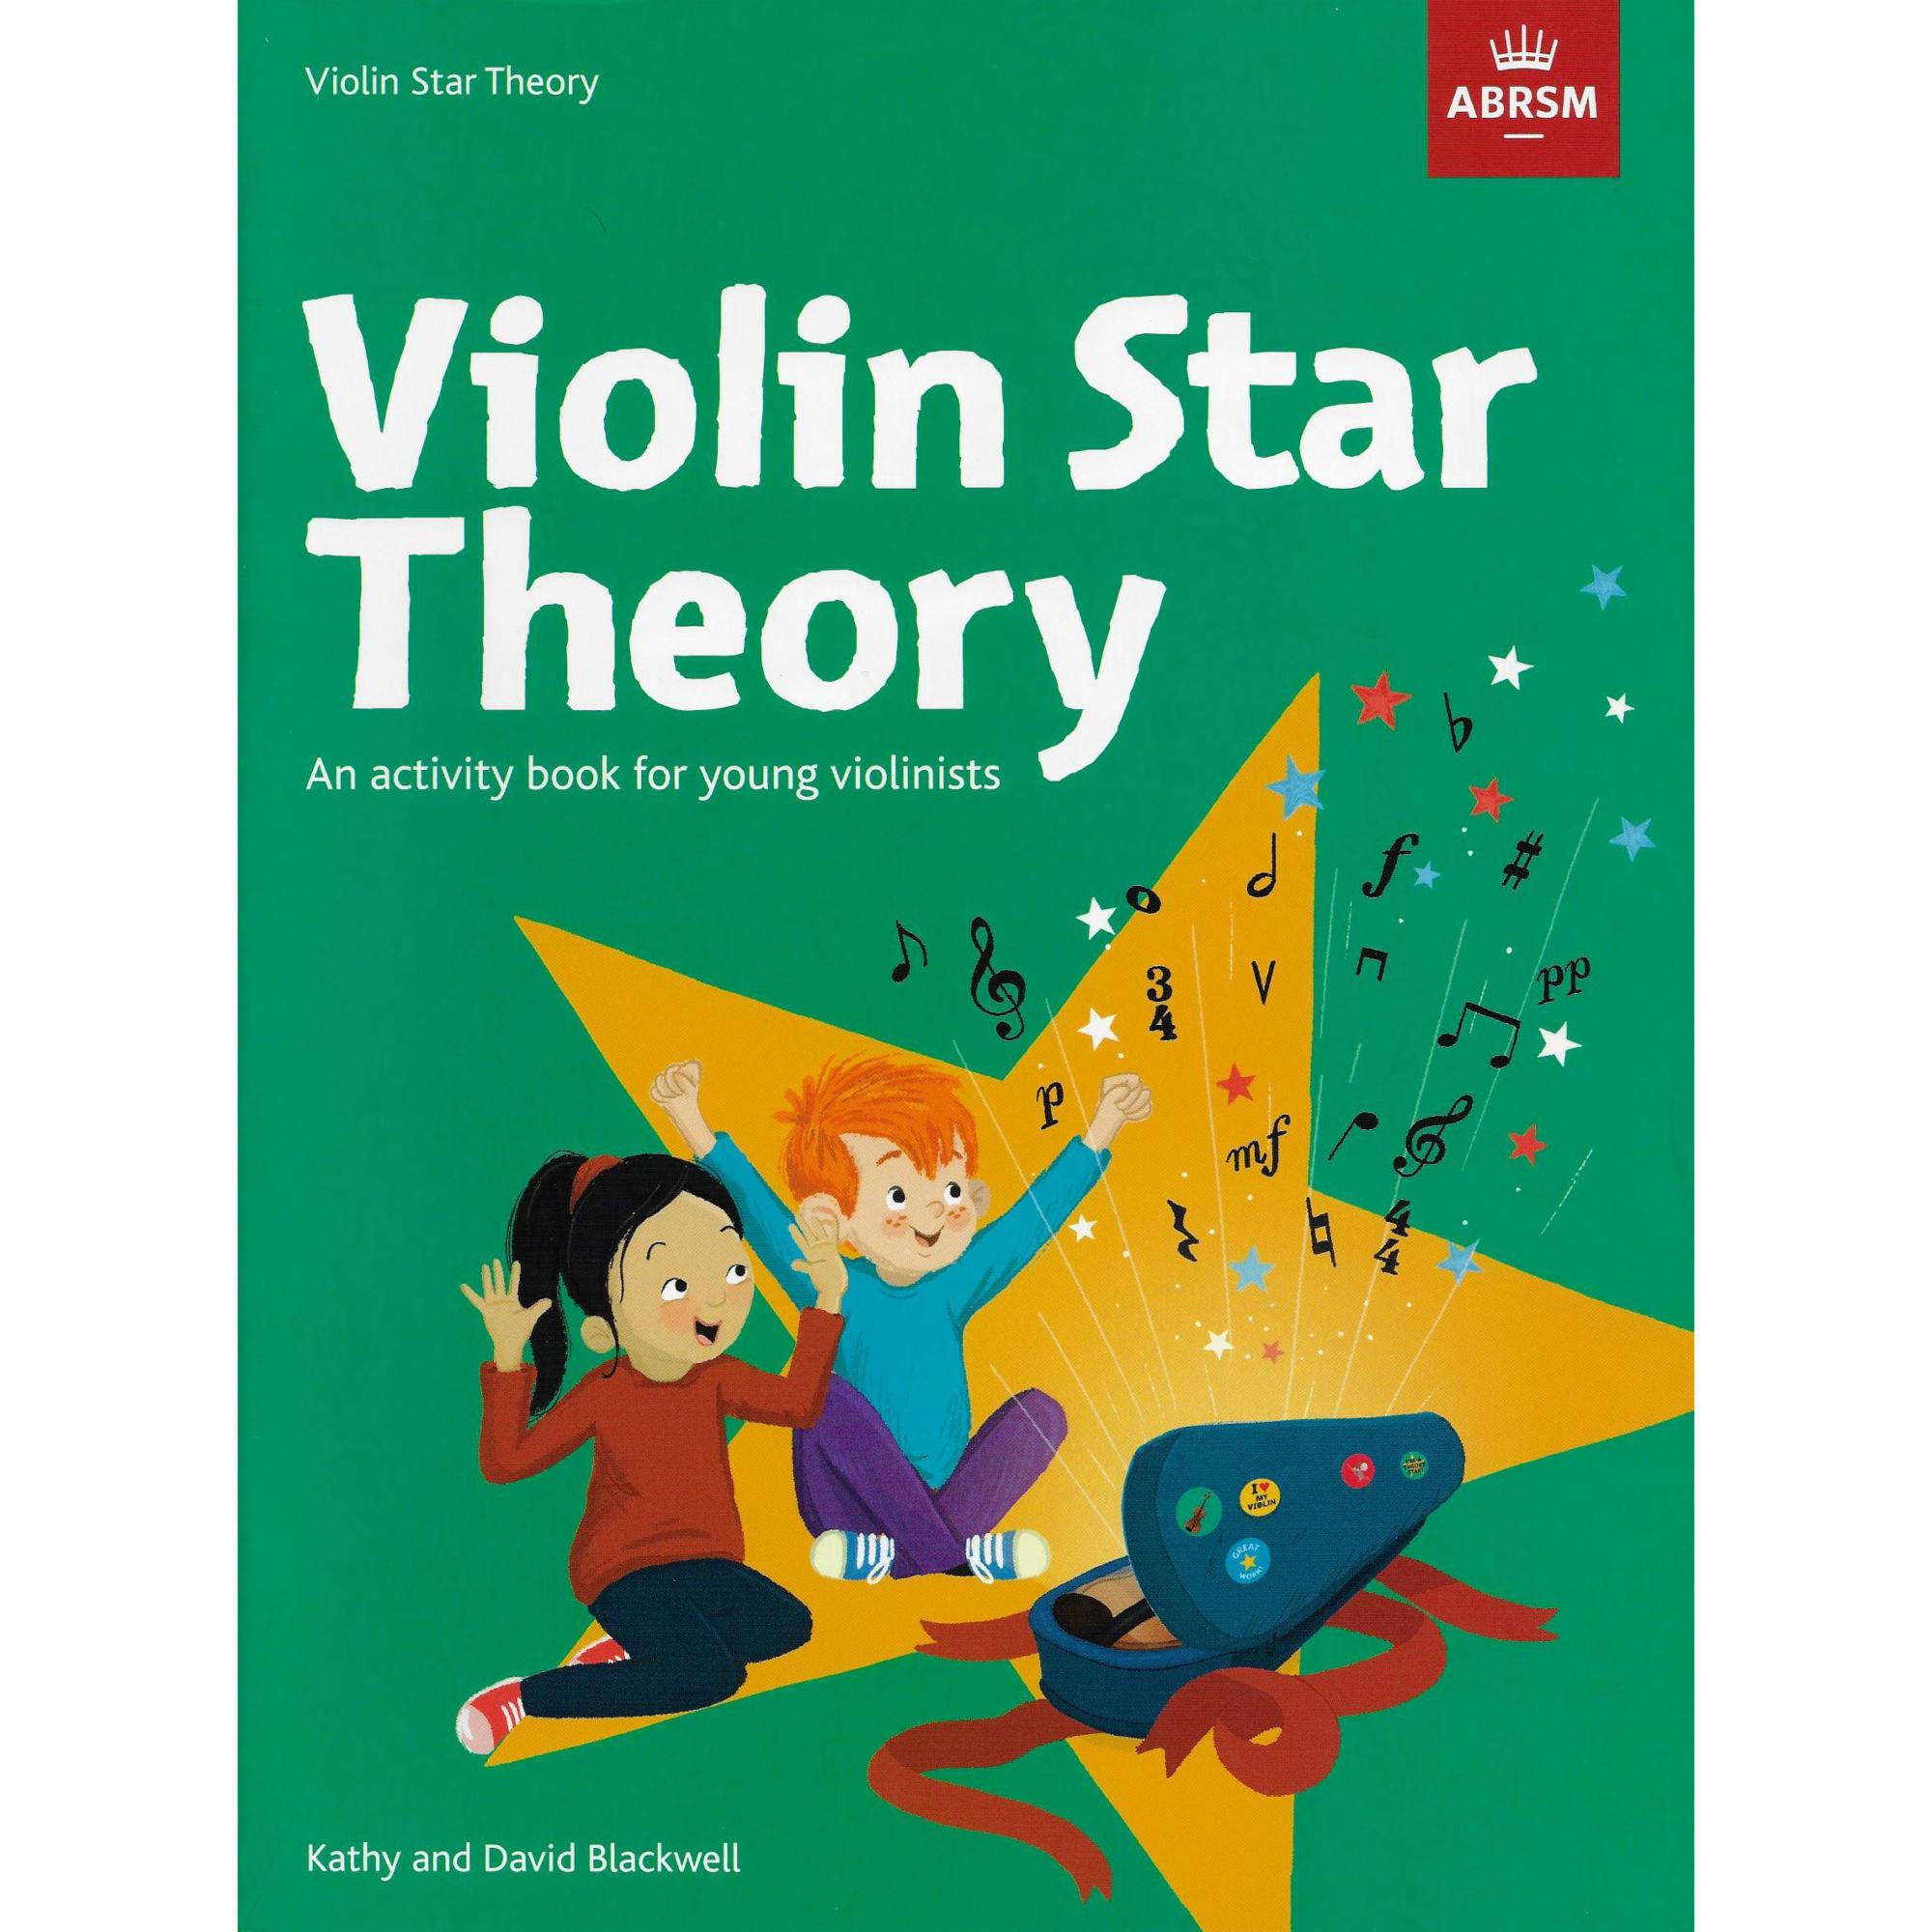 Violin Star Theory: An Activity book for Young Violinists